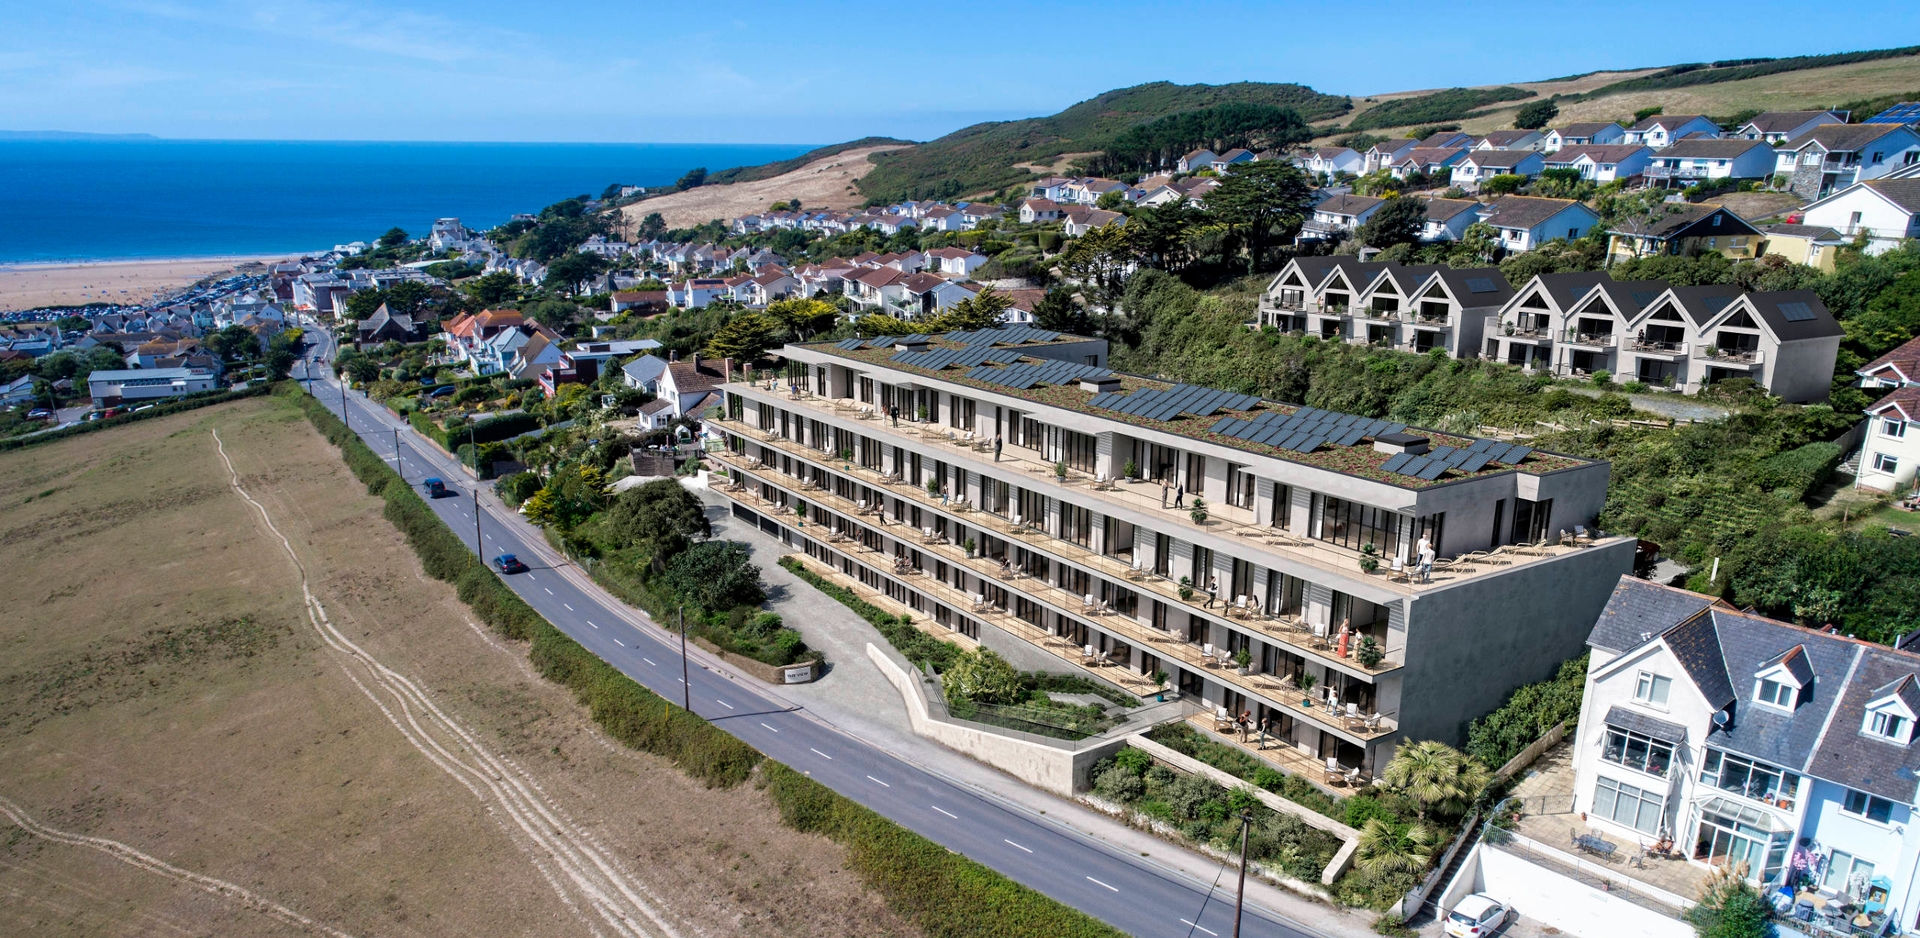 Joint venture main image - showing a large development overlooking the sea